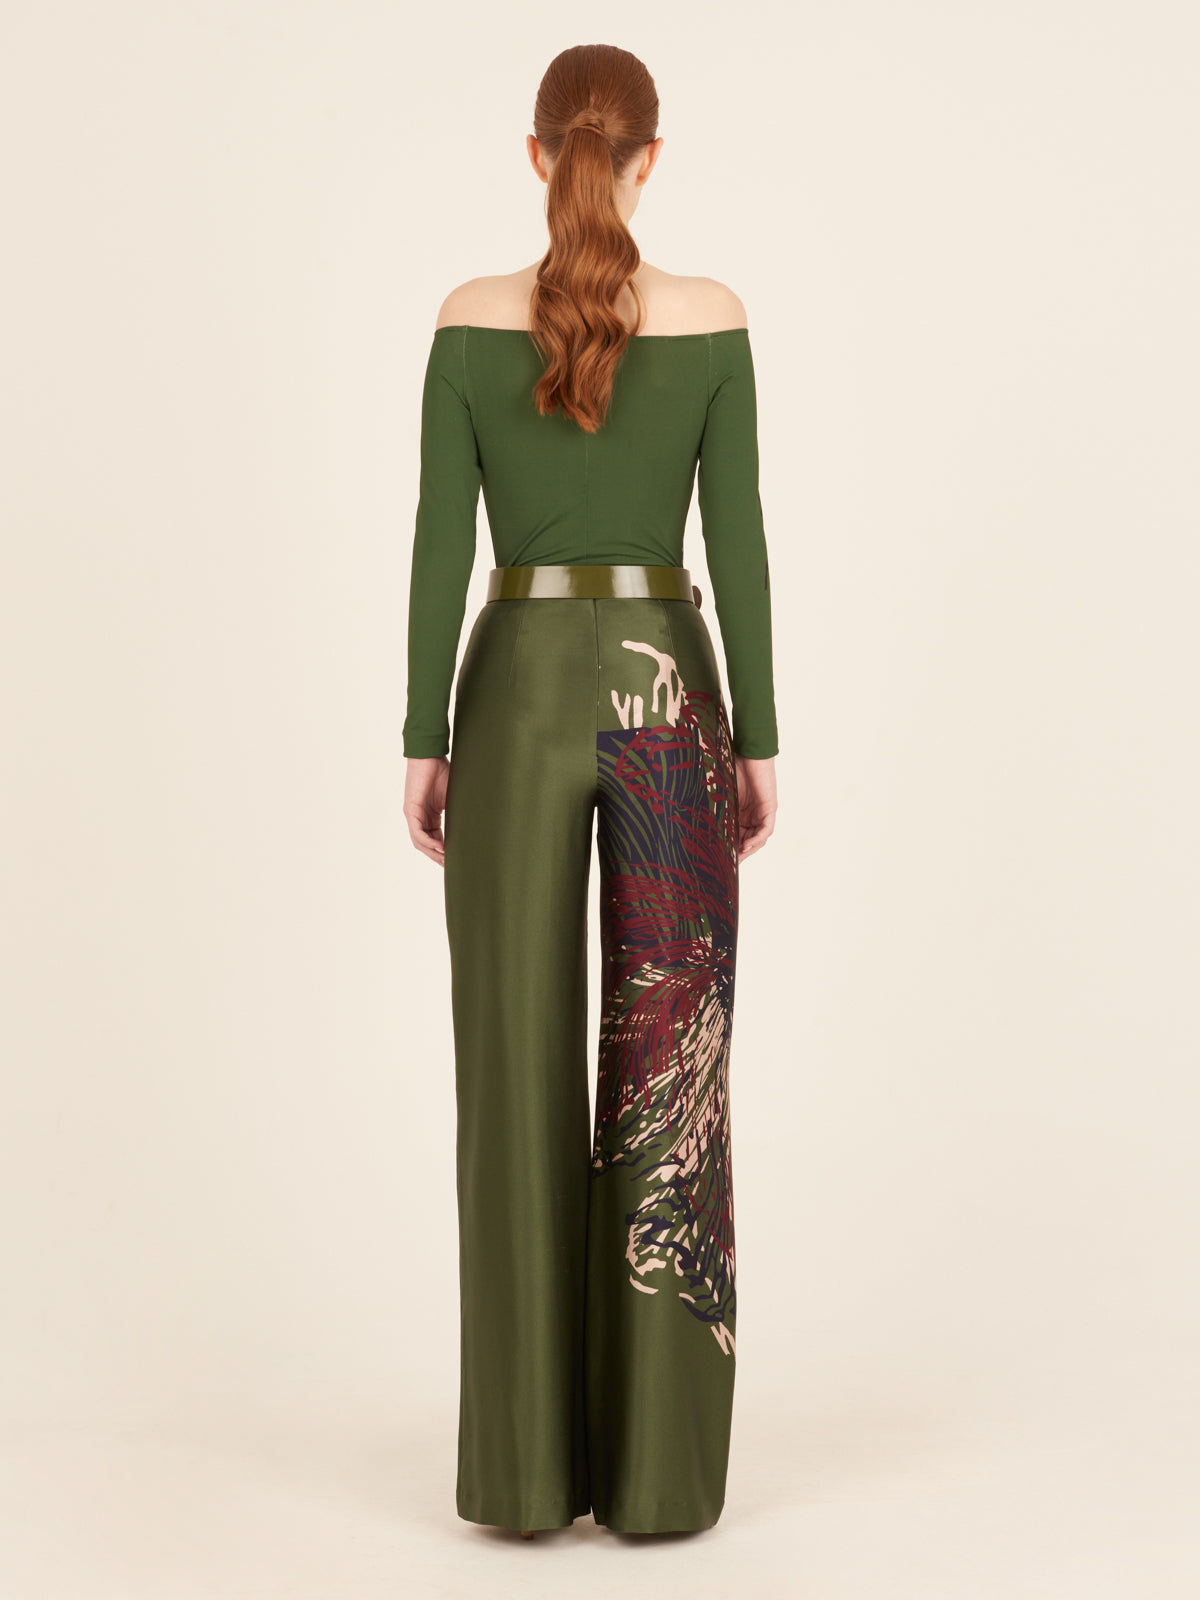 The woman is wearing comfortable green wide leg pants with floral print.
Product Name: Florence Bodysuit Green Floral